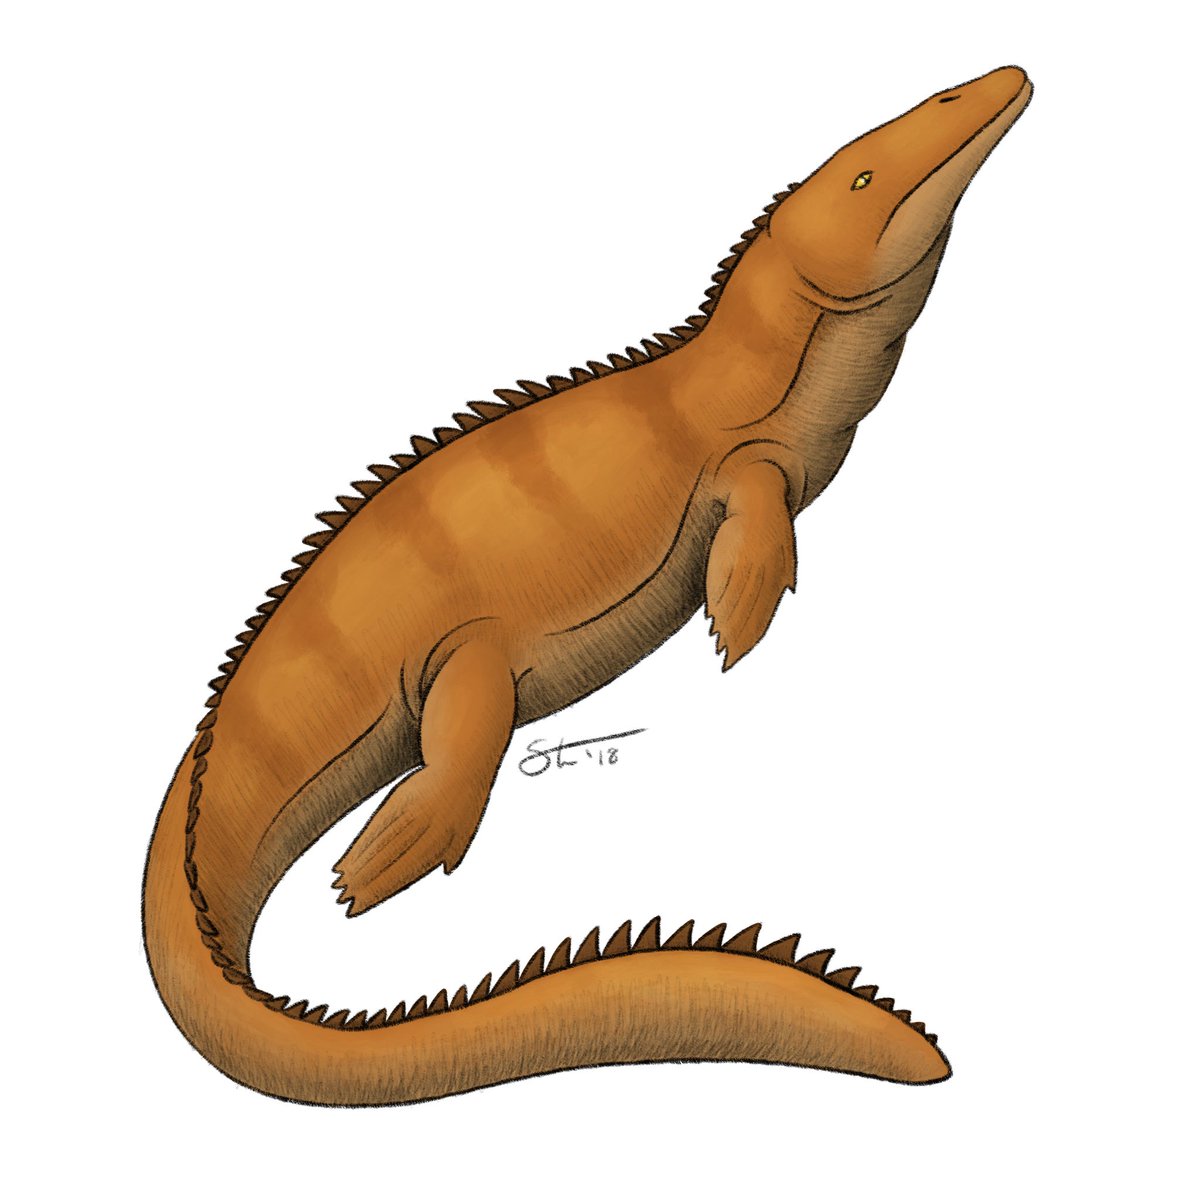 The first actual reptile in Heuvelmans’ system is the Marine Saurian, which he thought was either a surviving mosasaur or thalattosuchian. Unfortunately, the main sighting that formed the basis for this animal was probably a hoax, and the rest aren’t very descriptive.